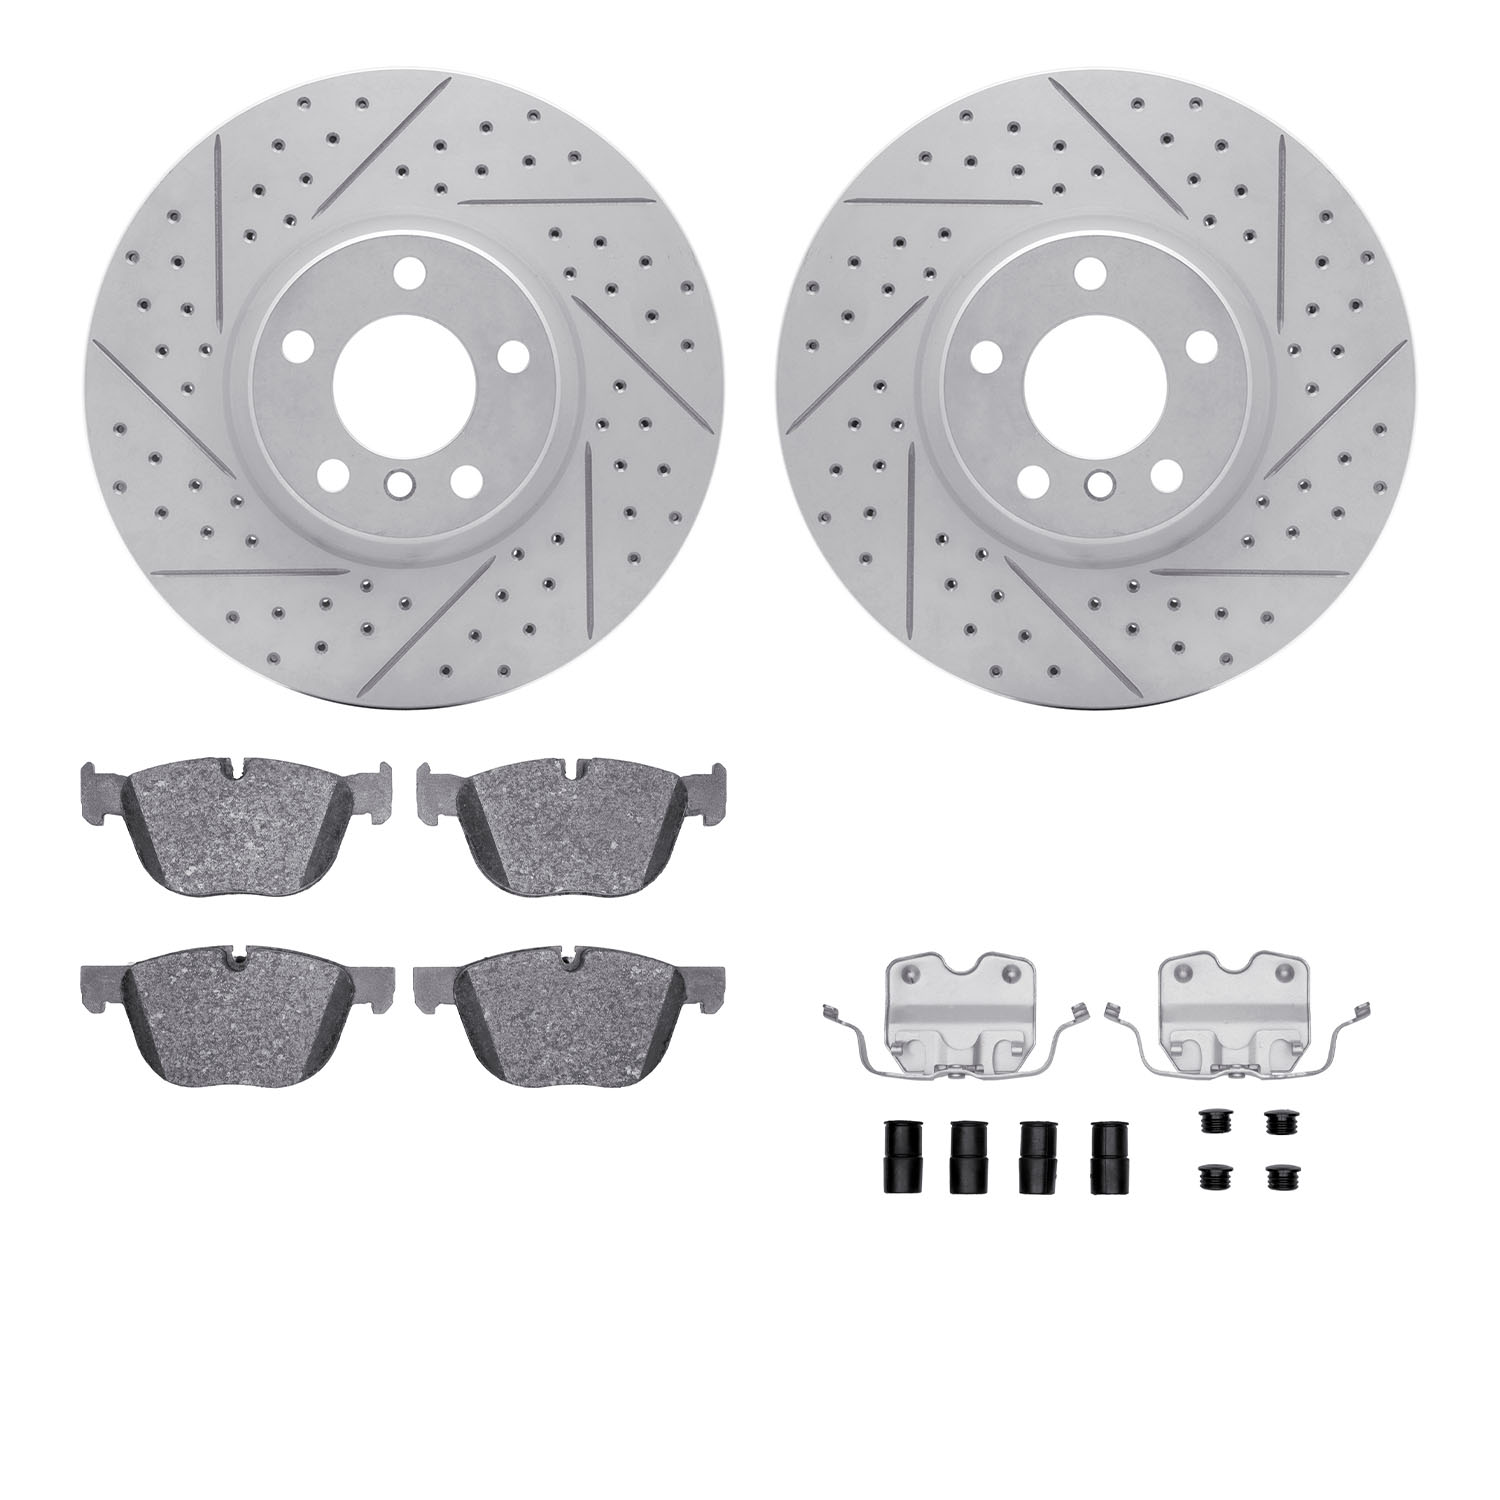 2512-31103 Geoperformance Drilled/Slotted Rotors w/5000 Advanced Brake Pads Kit & Hardware, 2007-2018 BMW, Position: Front